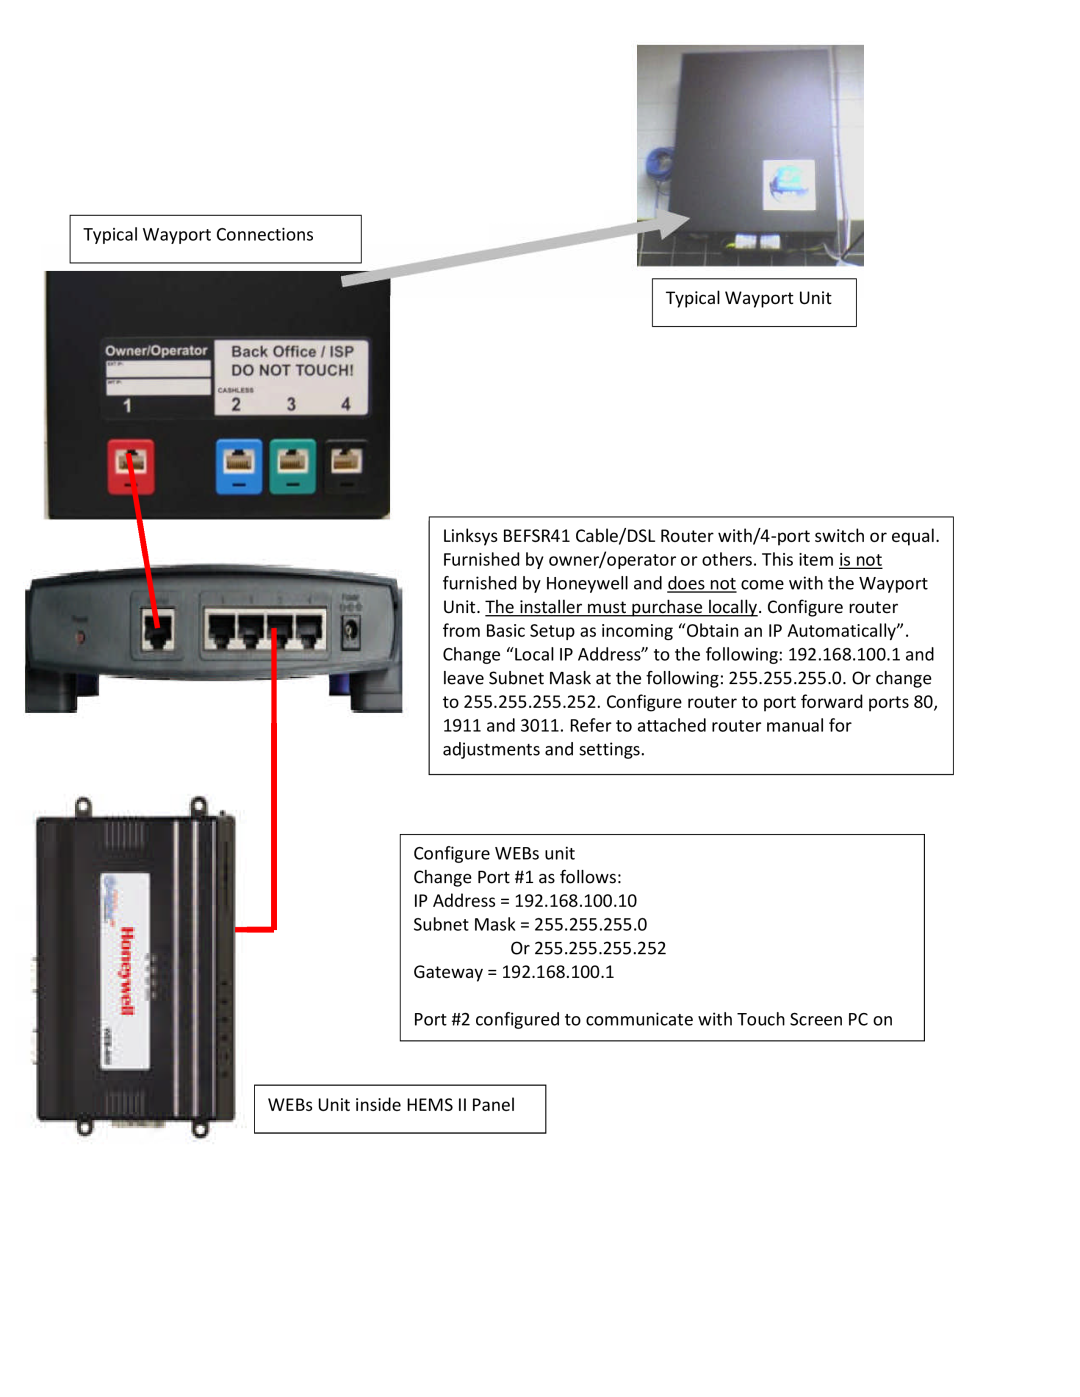 Honeywell HEMS II manual Typical Wayport Connections Typical Wayport Unit, Subnet Mask = Or Gateway = 